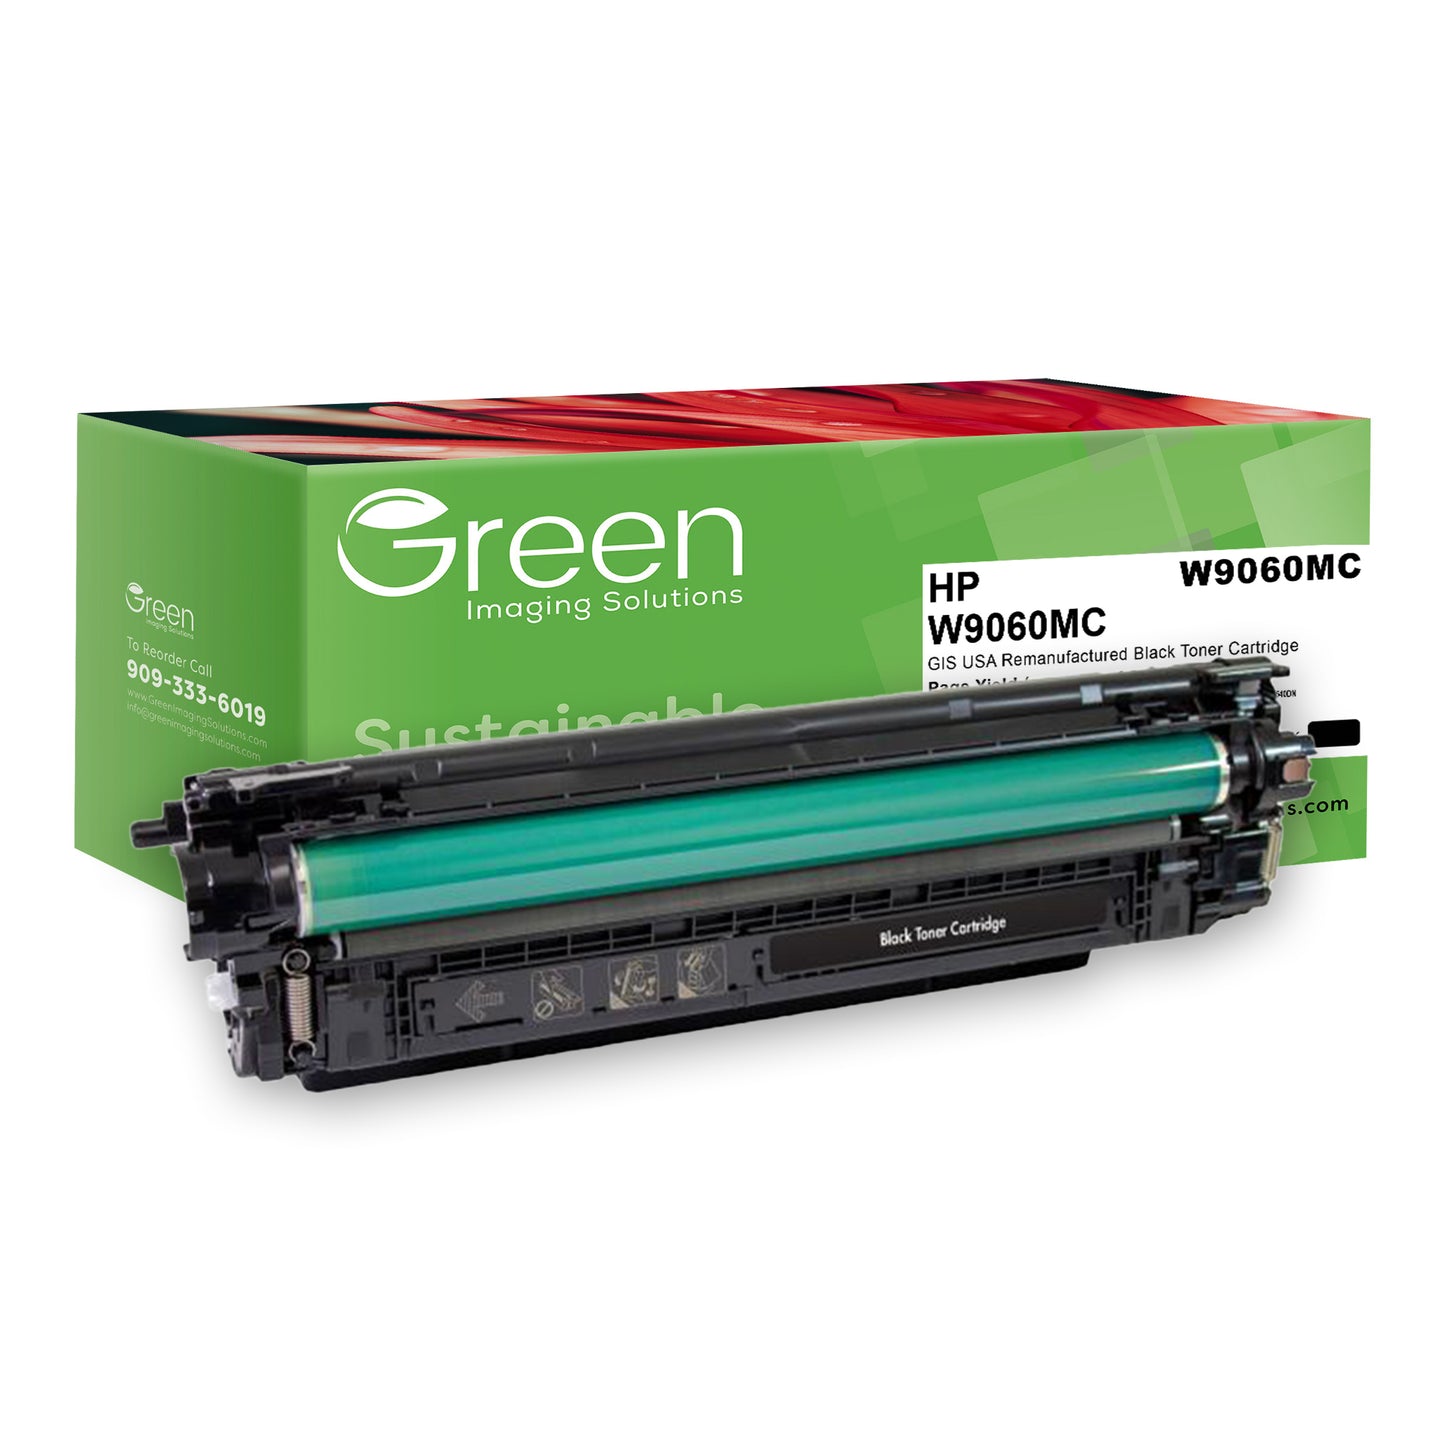 Green Imaging Solutions USA Remanufactured Black Toner Cartridge for HP W9060MC